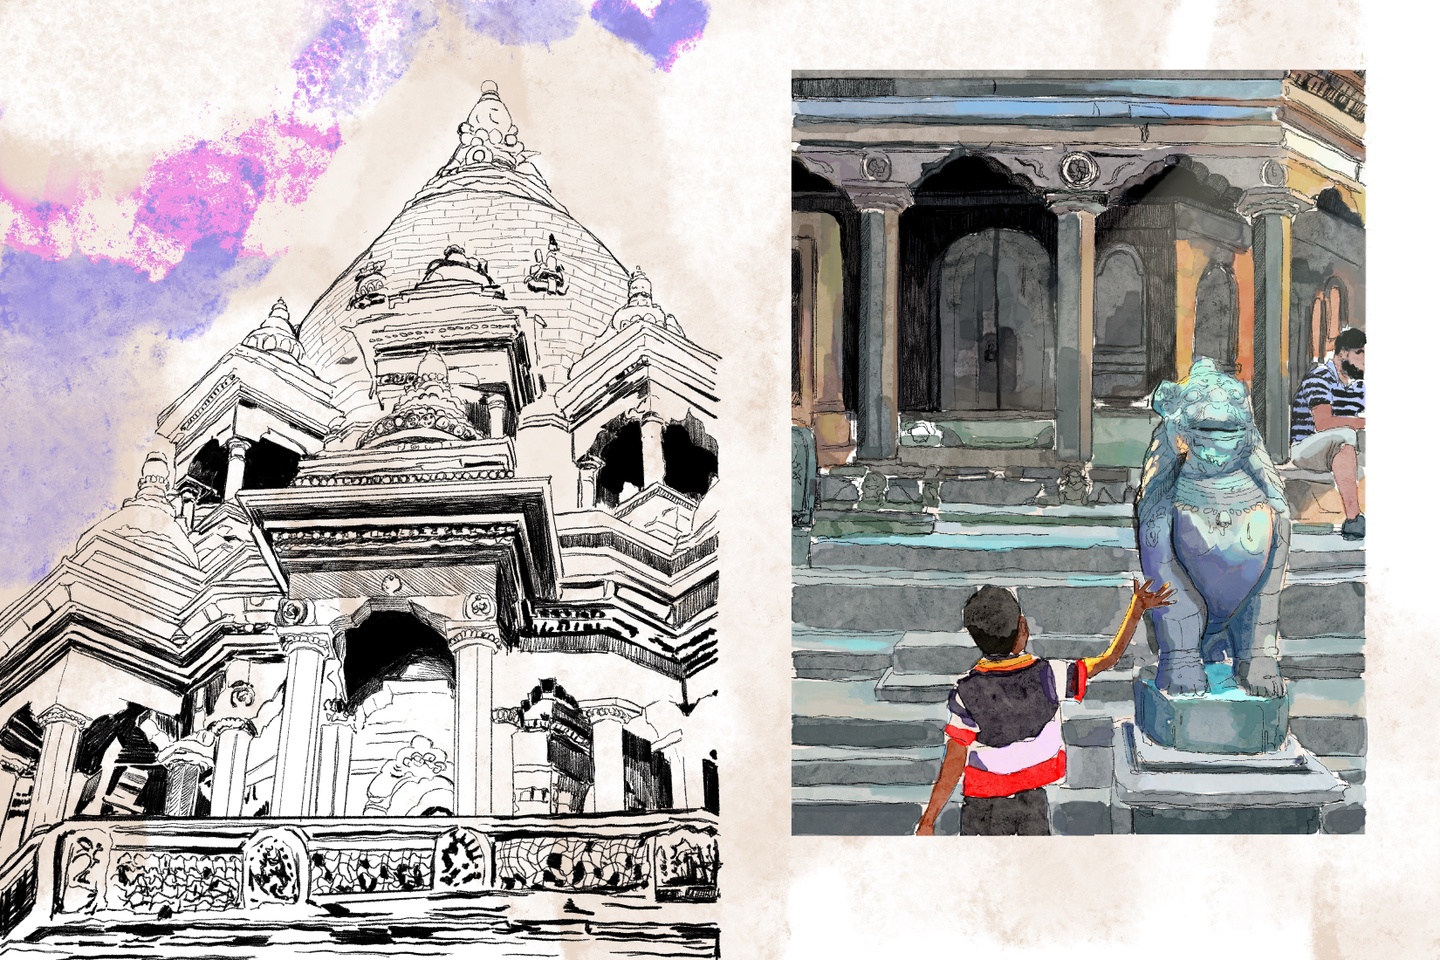 Ink and watercolor drawings of a temple against a colorful sky, and a child walking up the steps of a temple touching a stone sculpture of a temple protector.